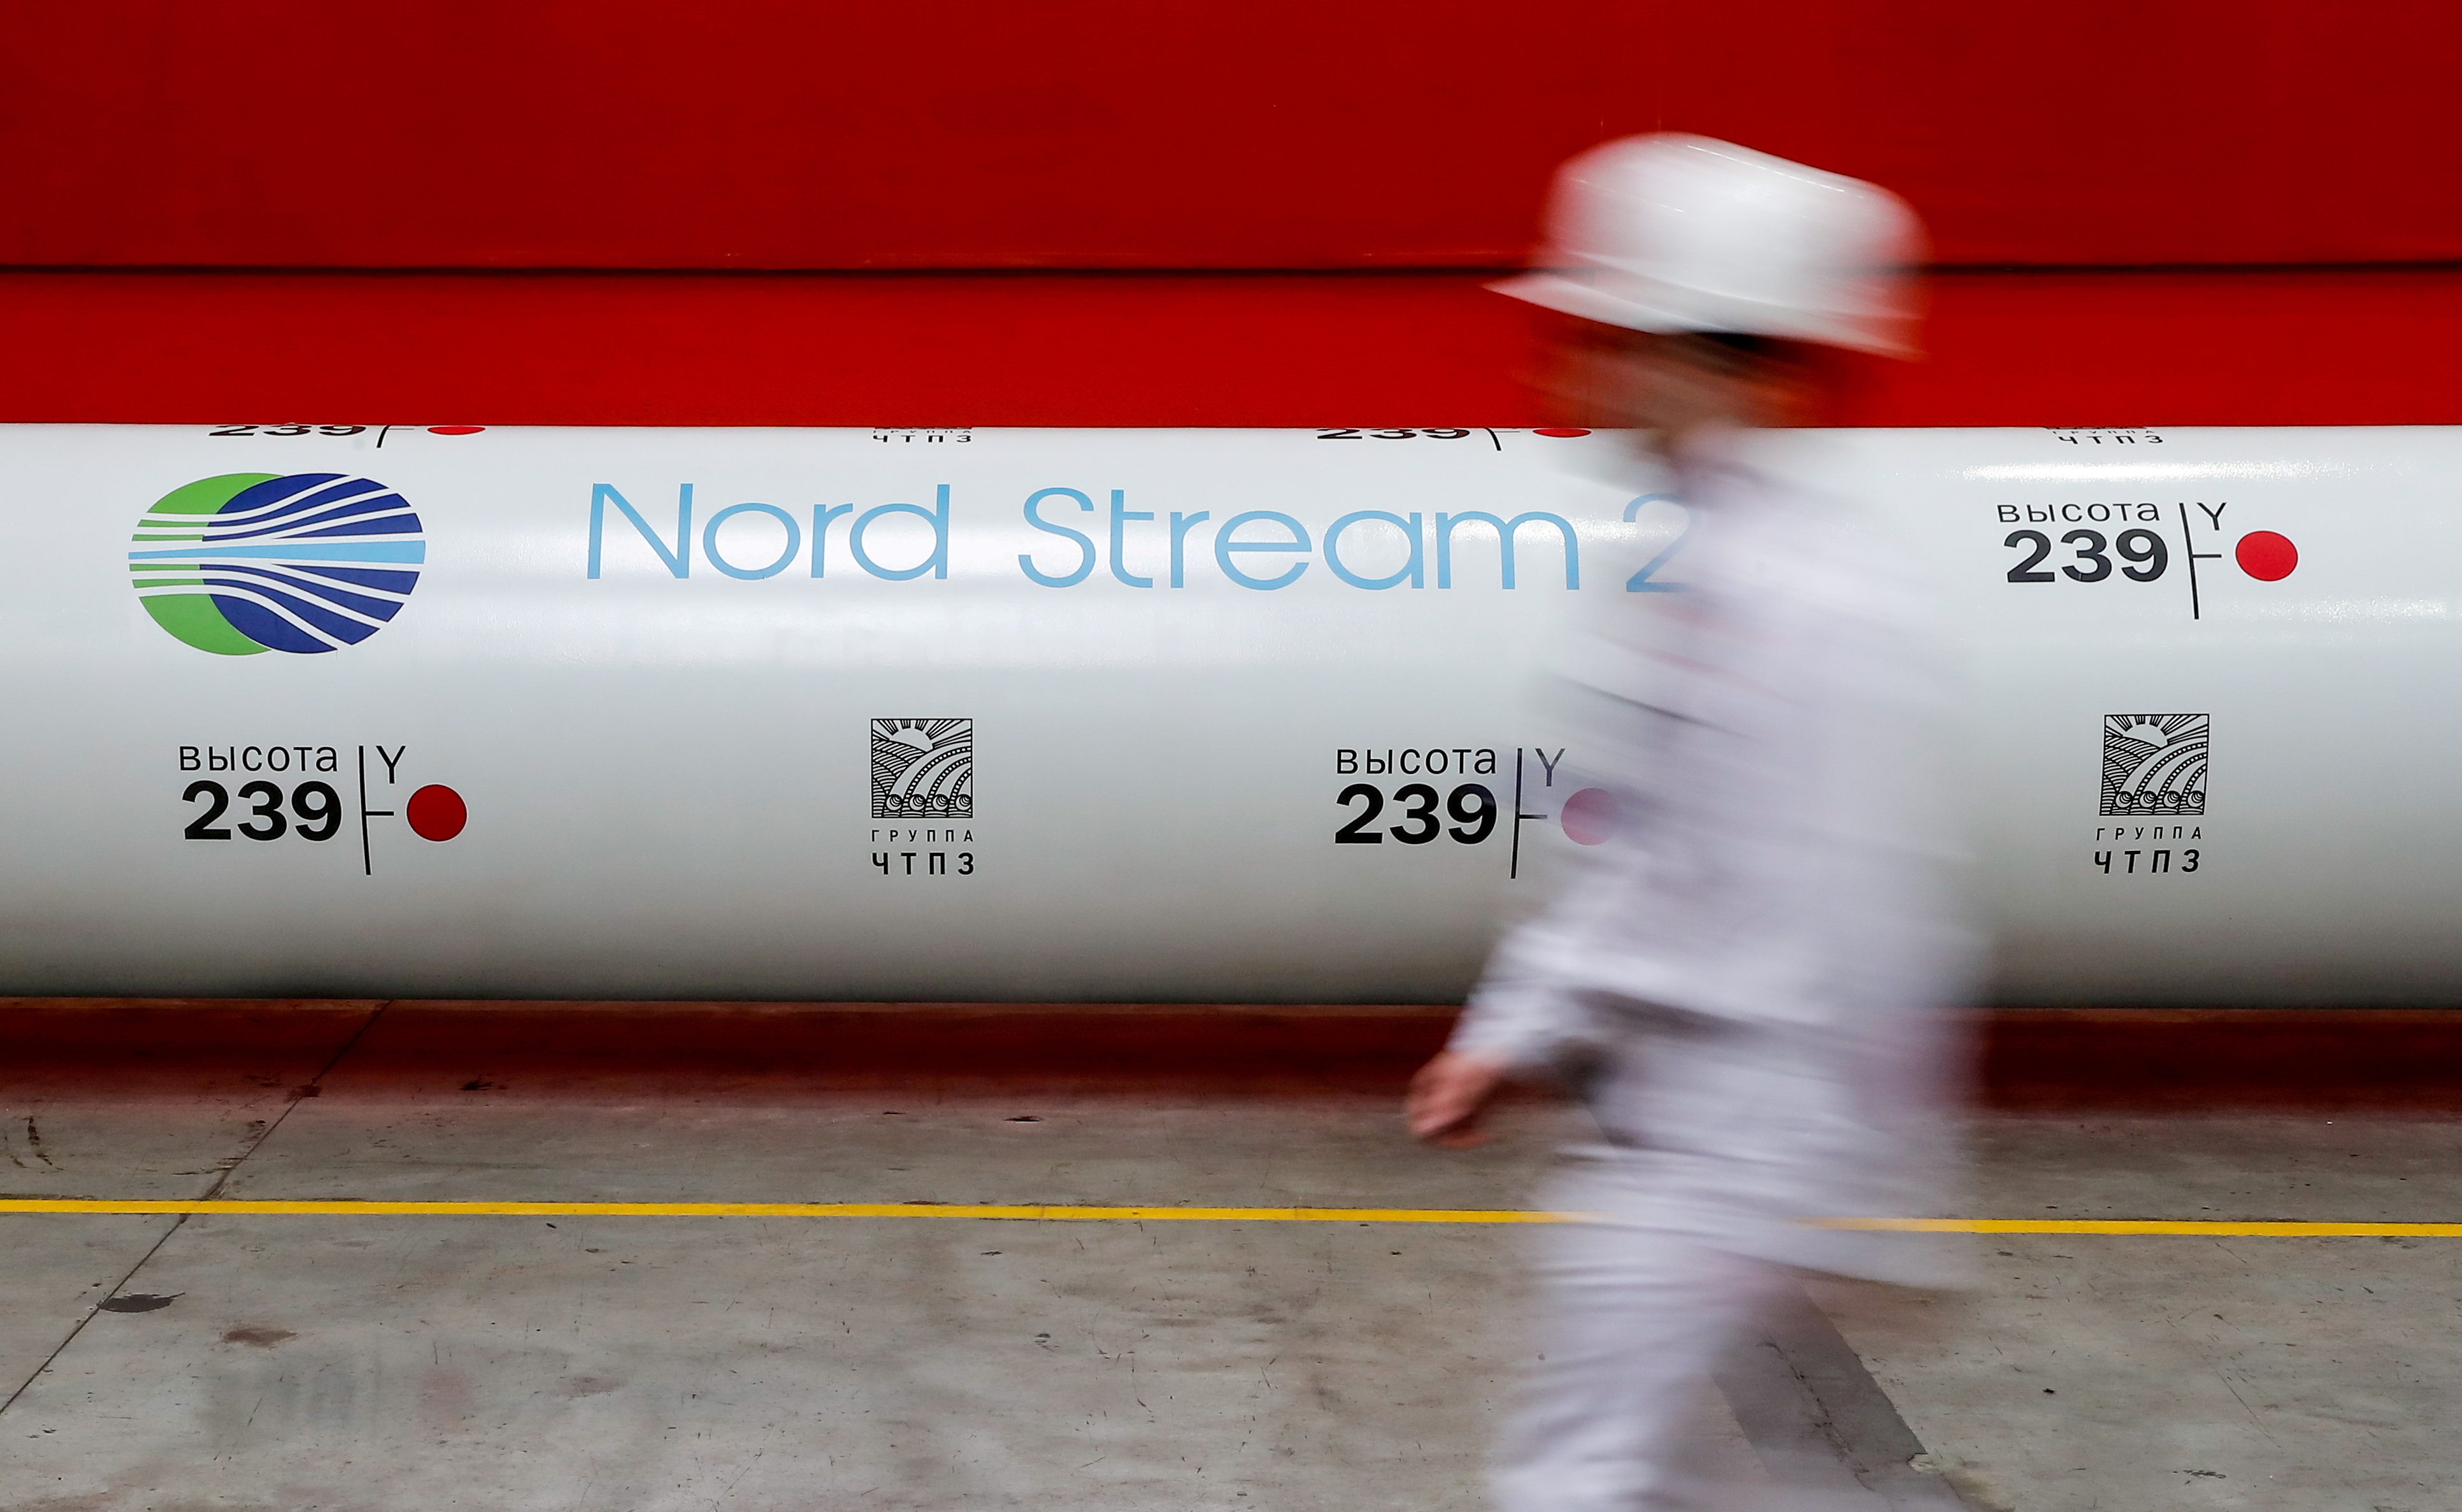 The logo of the Nord Stream 2 gas pipeline project is seen on a pipe at the Chelyabinsk pipe rolling plant in Chelyabinsk, Russia